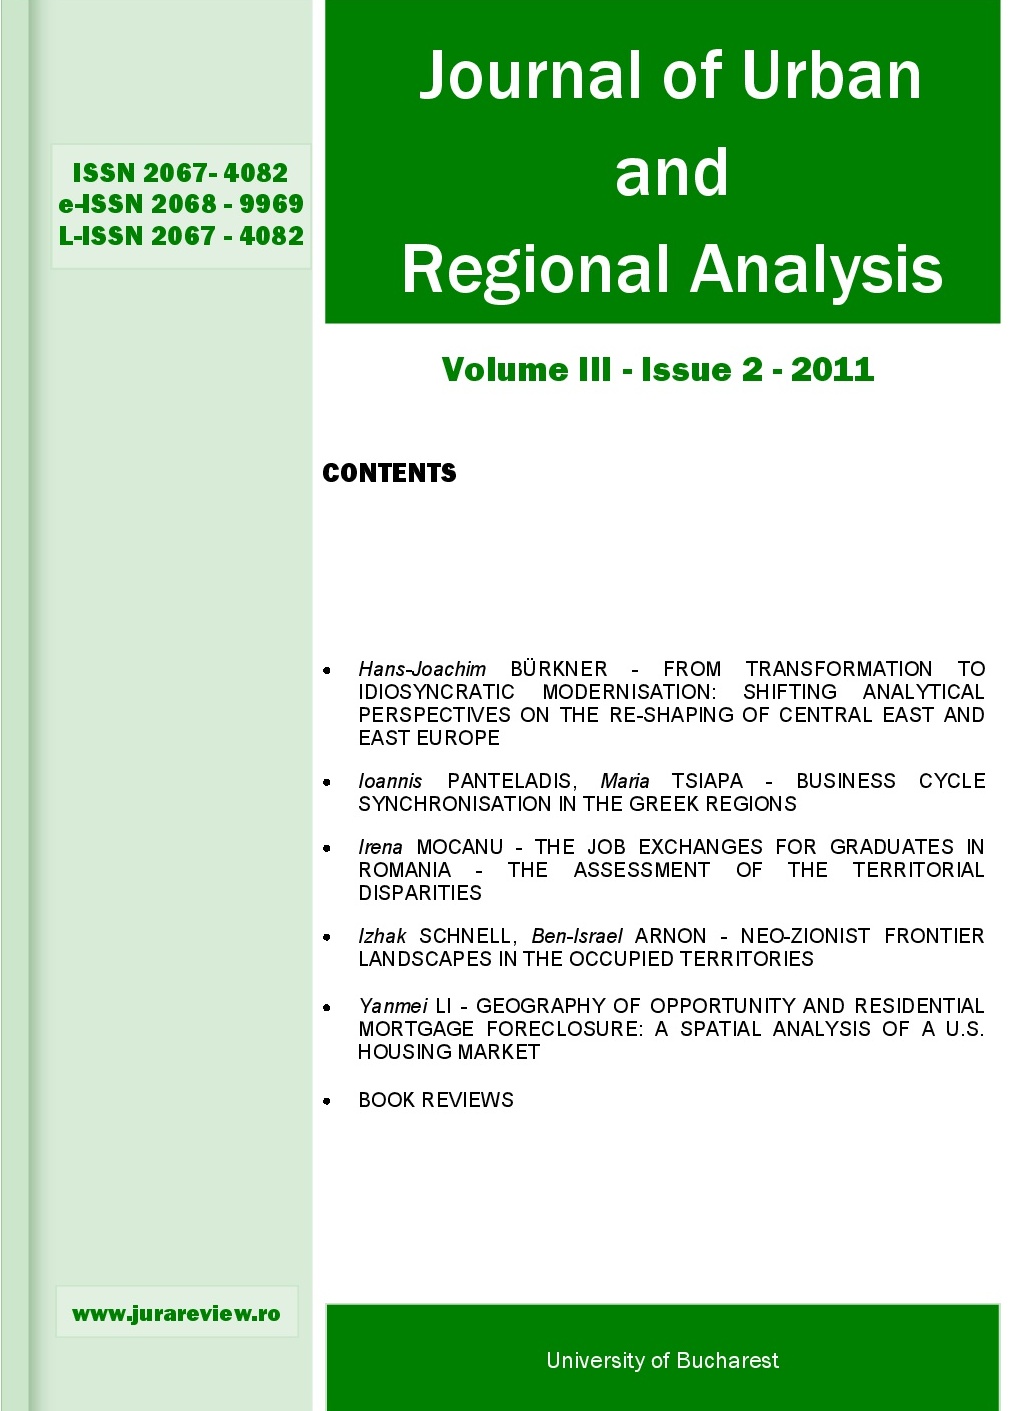 BUSINESS CYCLE SYNCHRONISATION IN THE GREEK REGIONS Cover Image